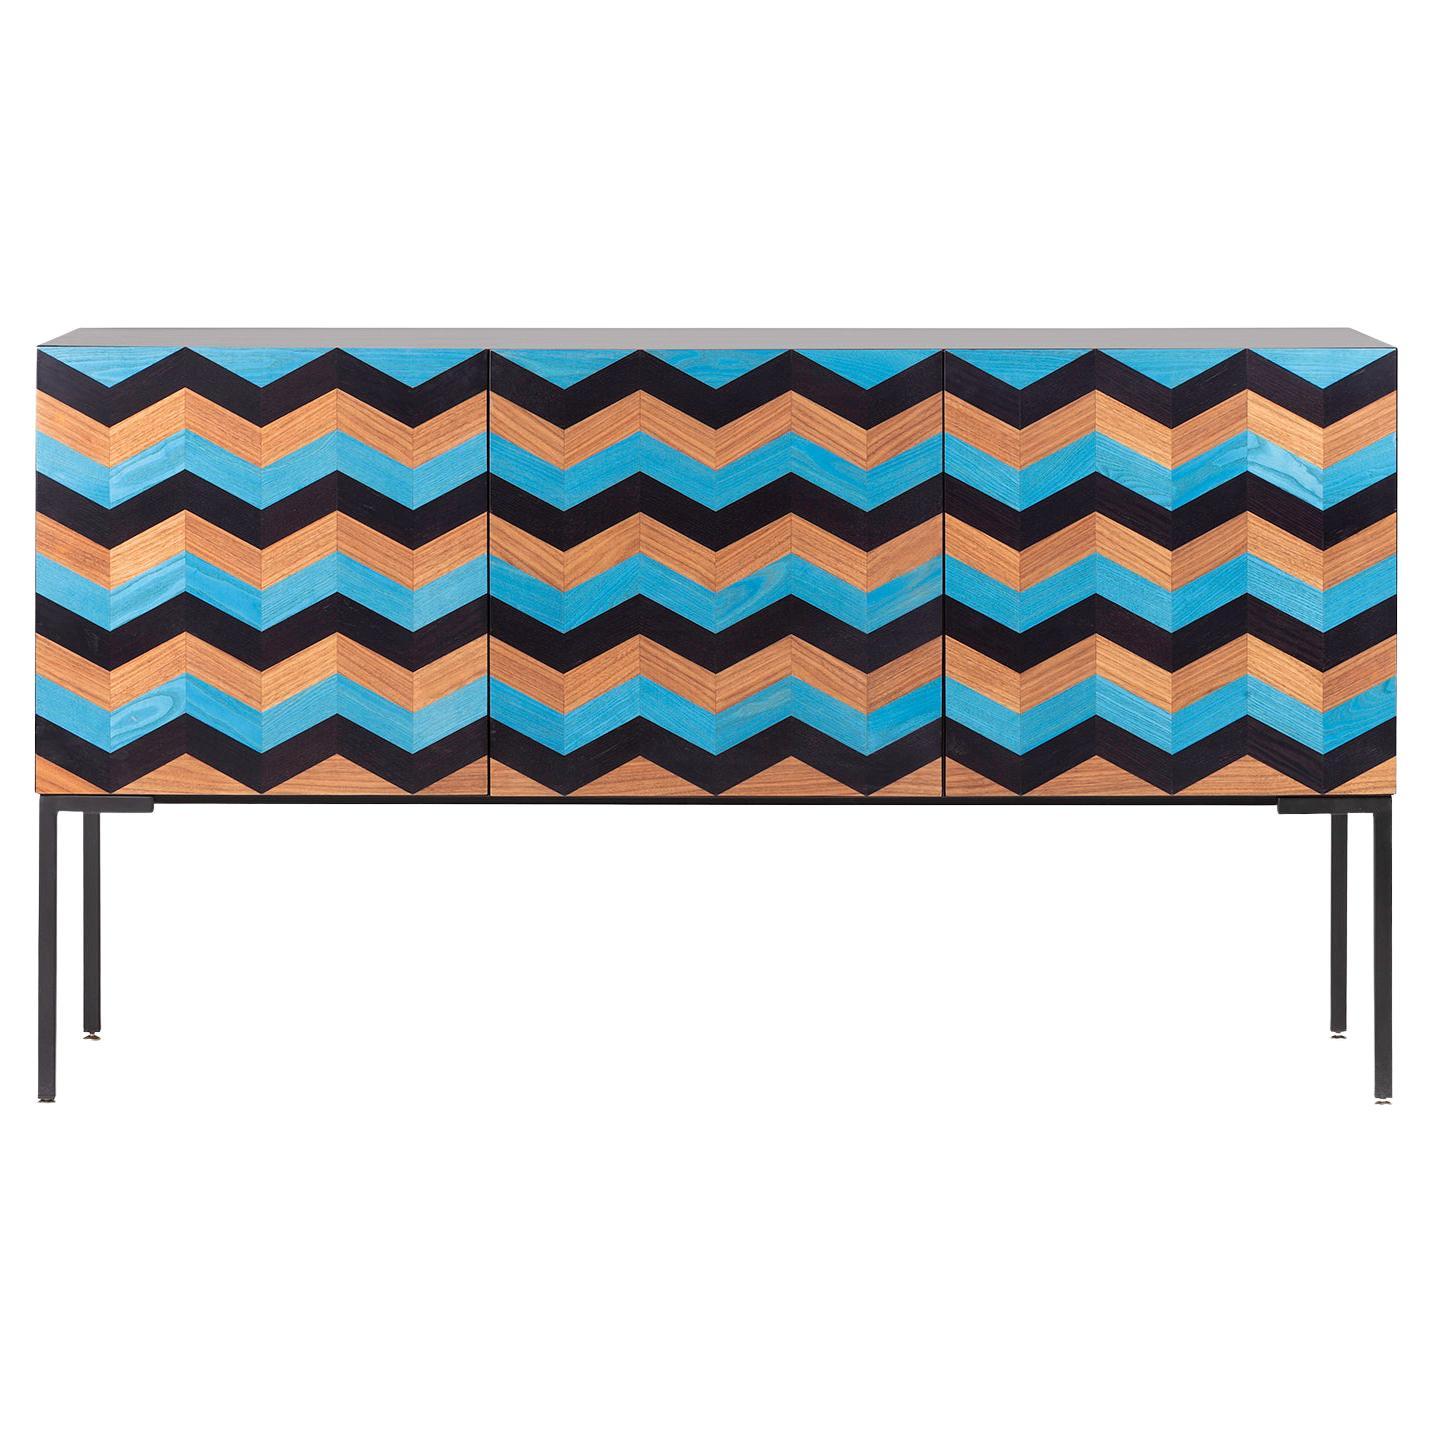 21st Century Marea Inlaid Sideboard in Walnut, Black and Blue Ash, Made in Italy